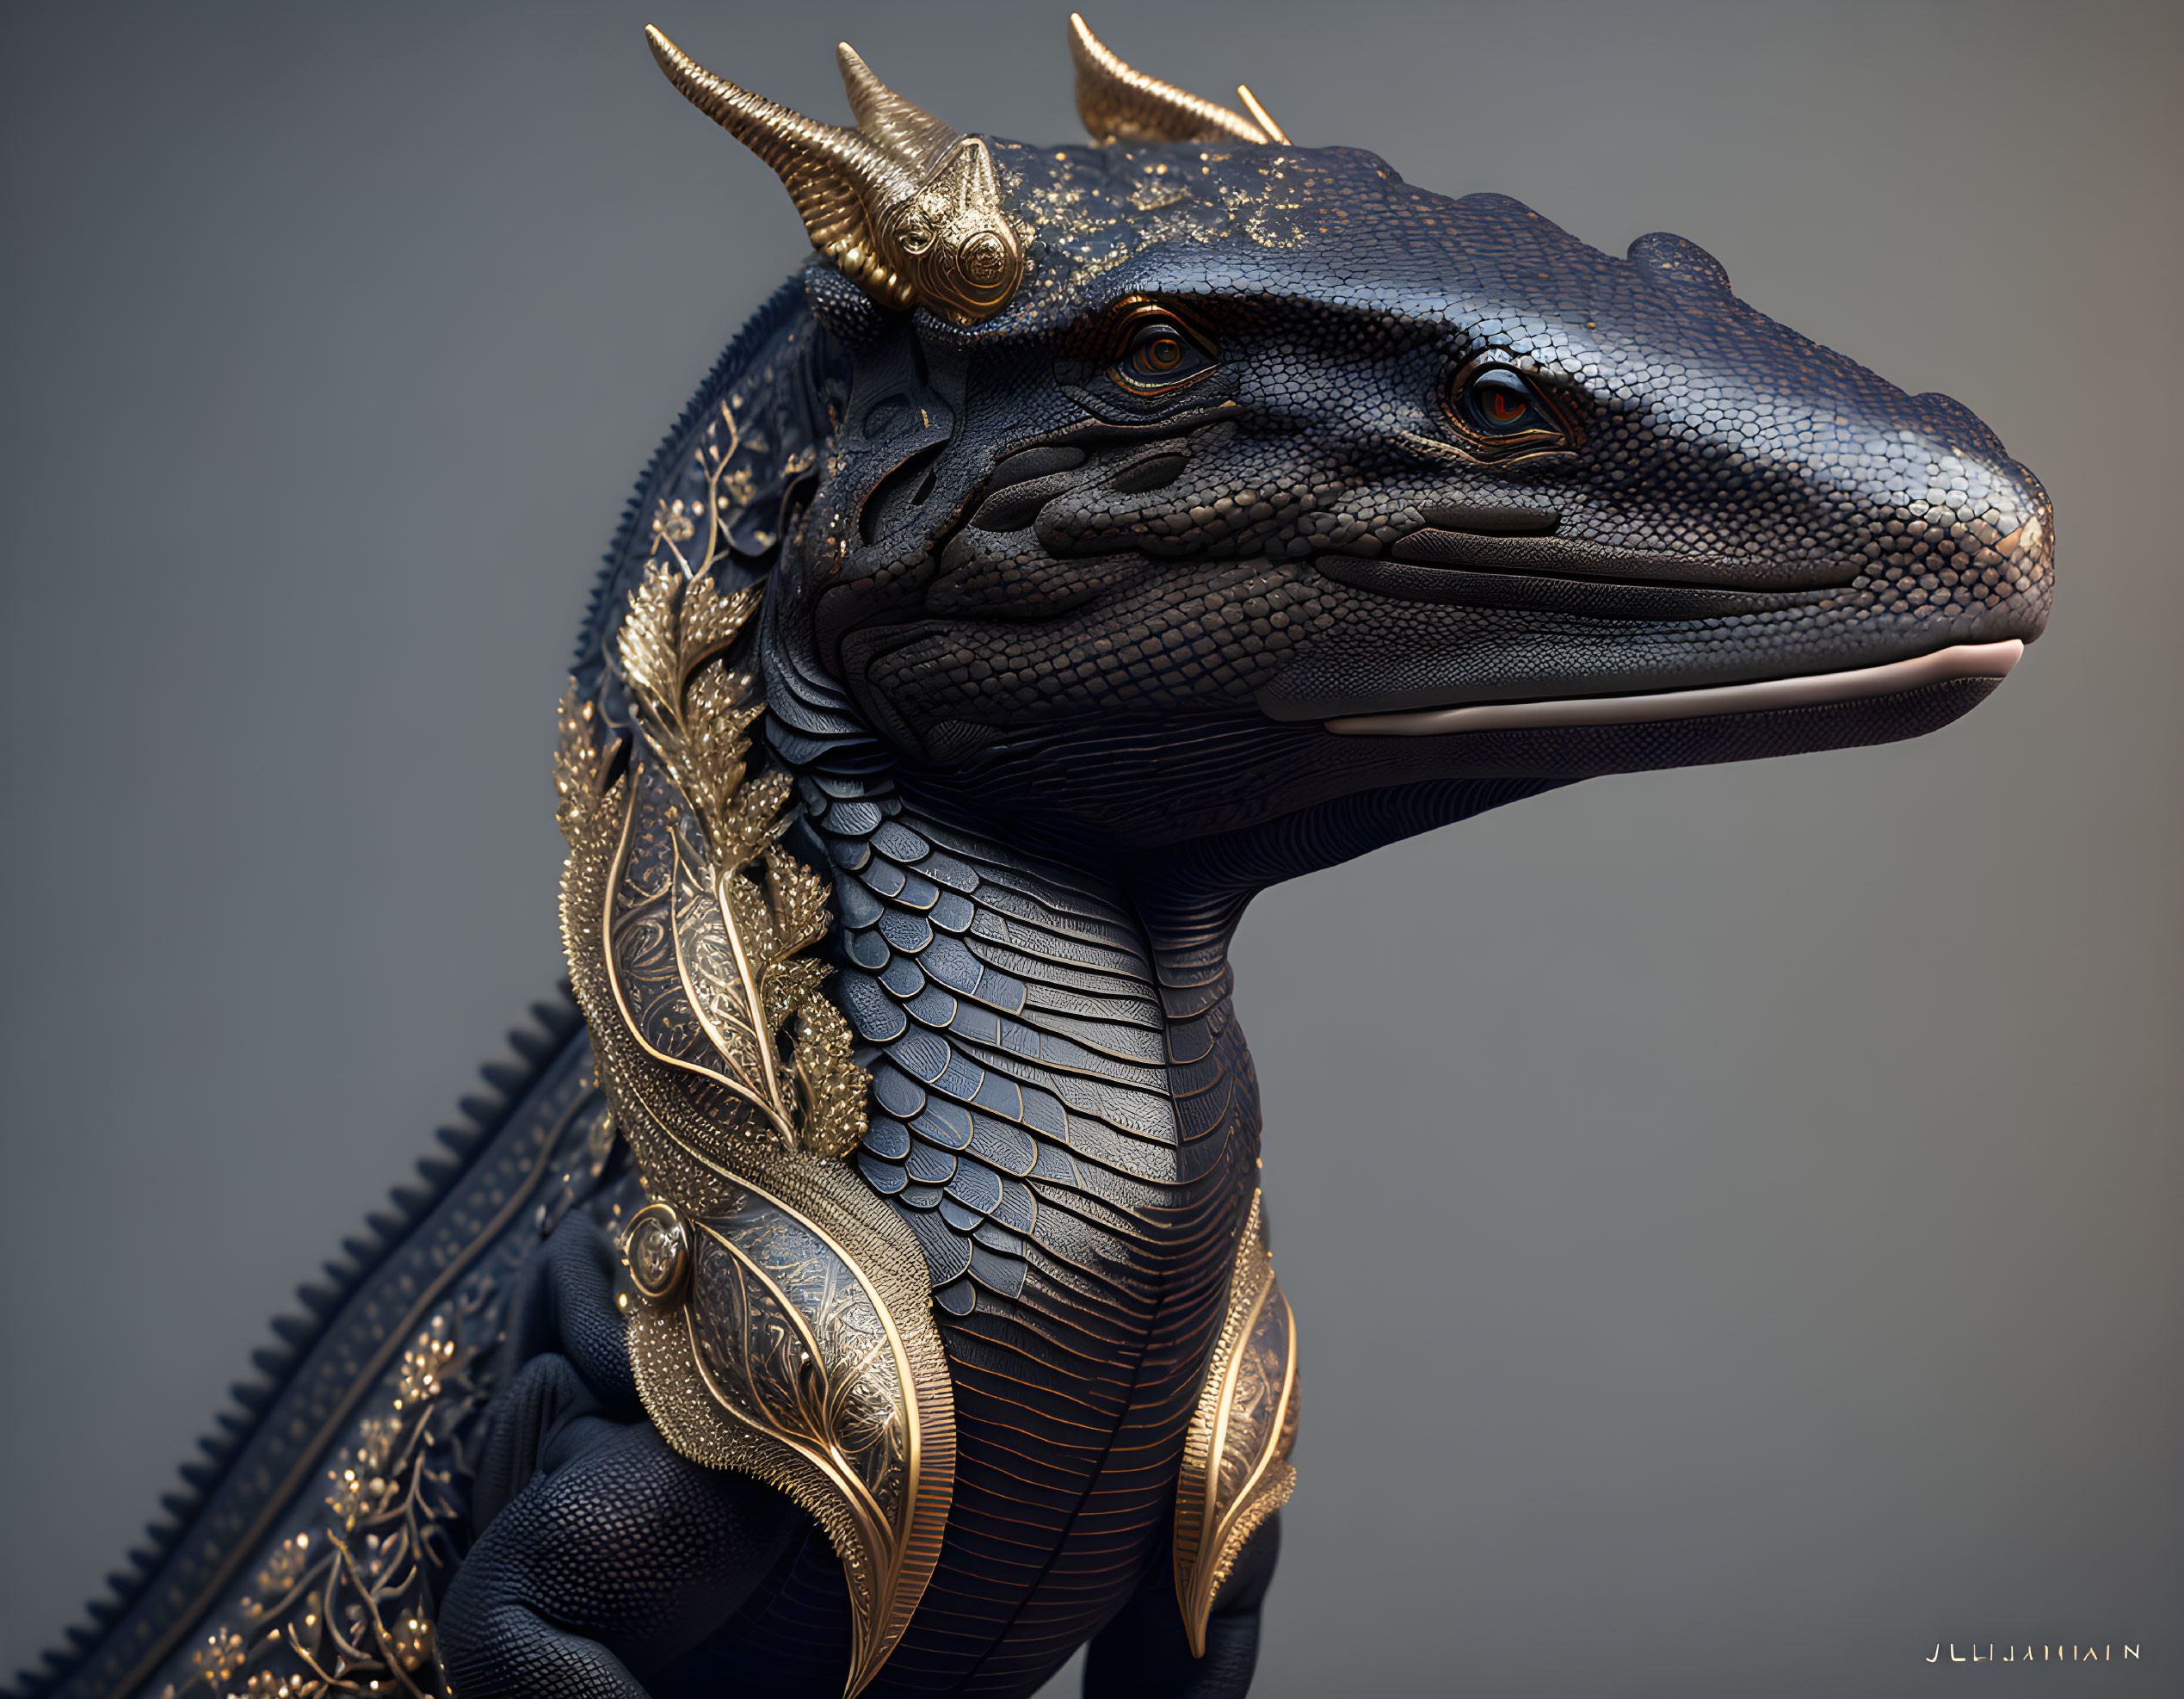 Detailed digital artwork: Majestic dragon with golden adornments and intricate scales